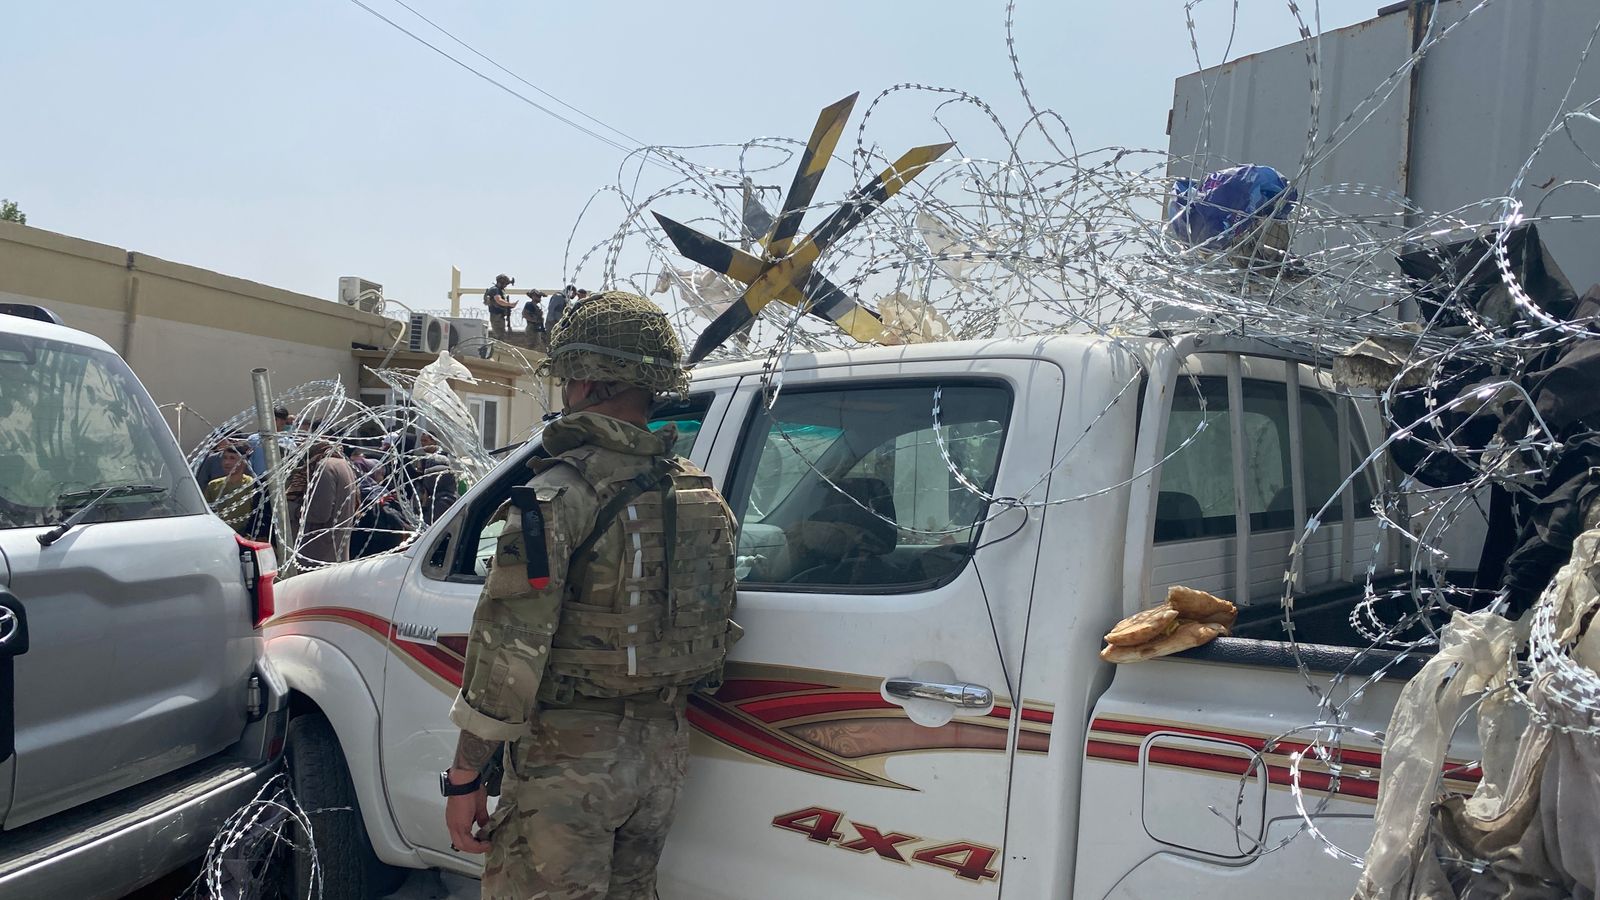 Afghanistan: Desperate women throw babies over razor wire at compound, asking British soldiers to take them